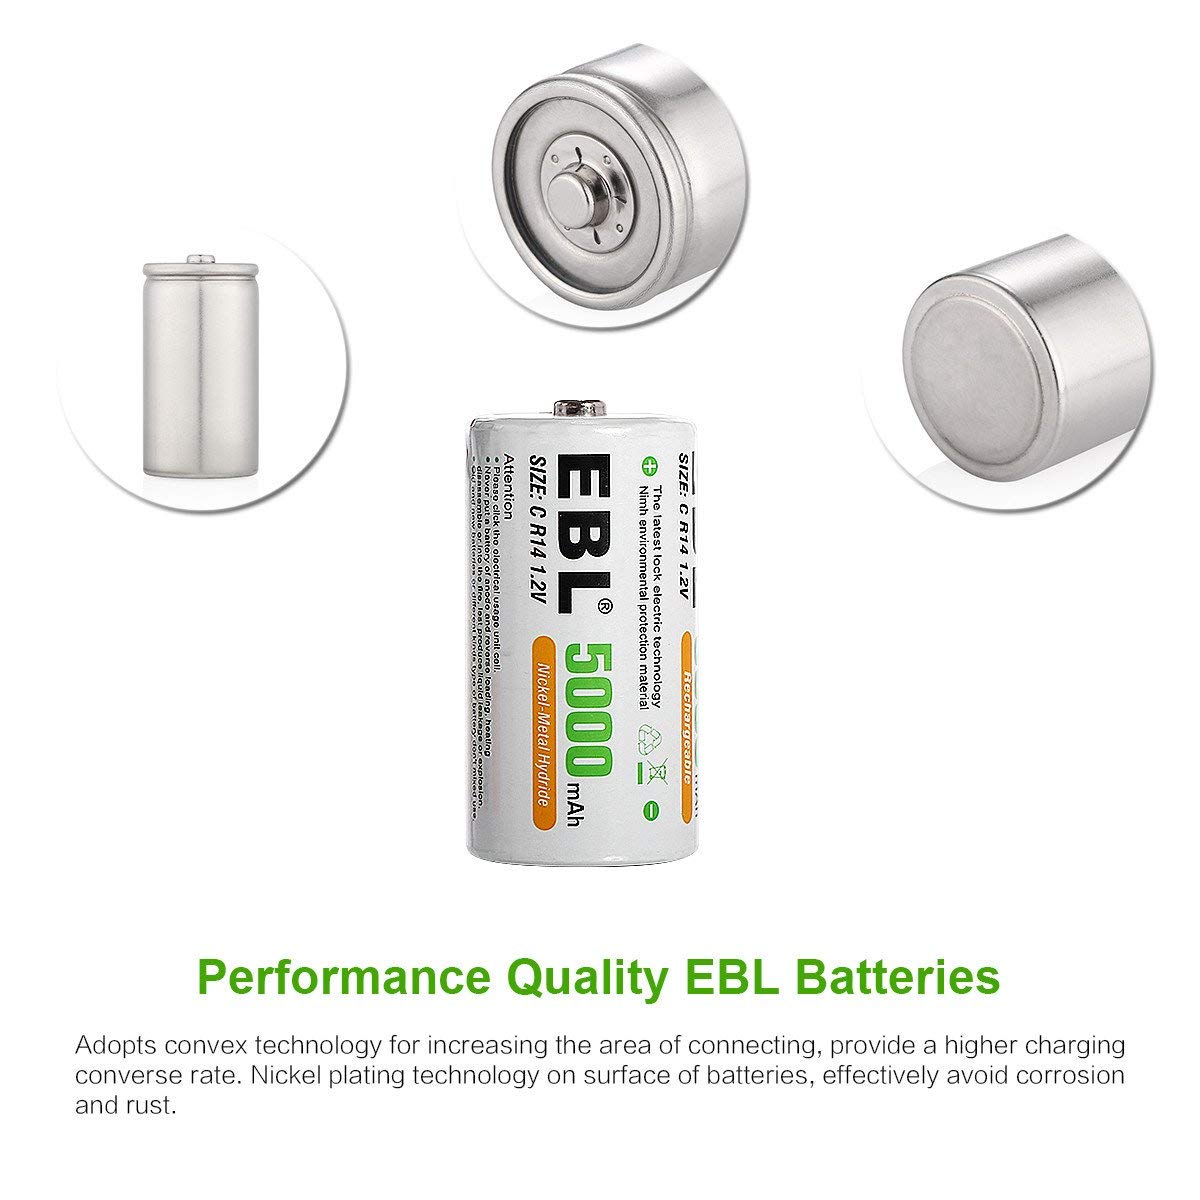 EBL LN-8151 1.2V C Cell 5000mAh Rechargeable NiMH Nickel Metal Hydride Battery (Pack of 2) with Included Storage Case for Portable and Emergency Electronics